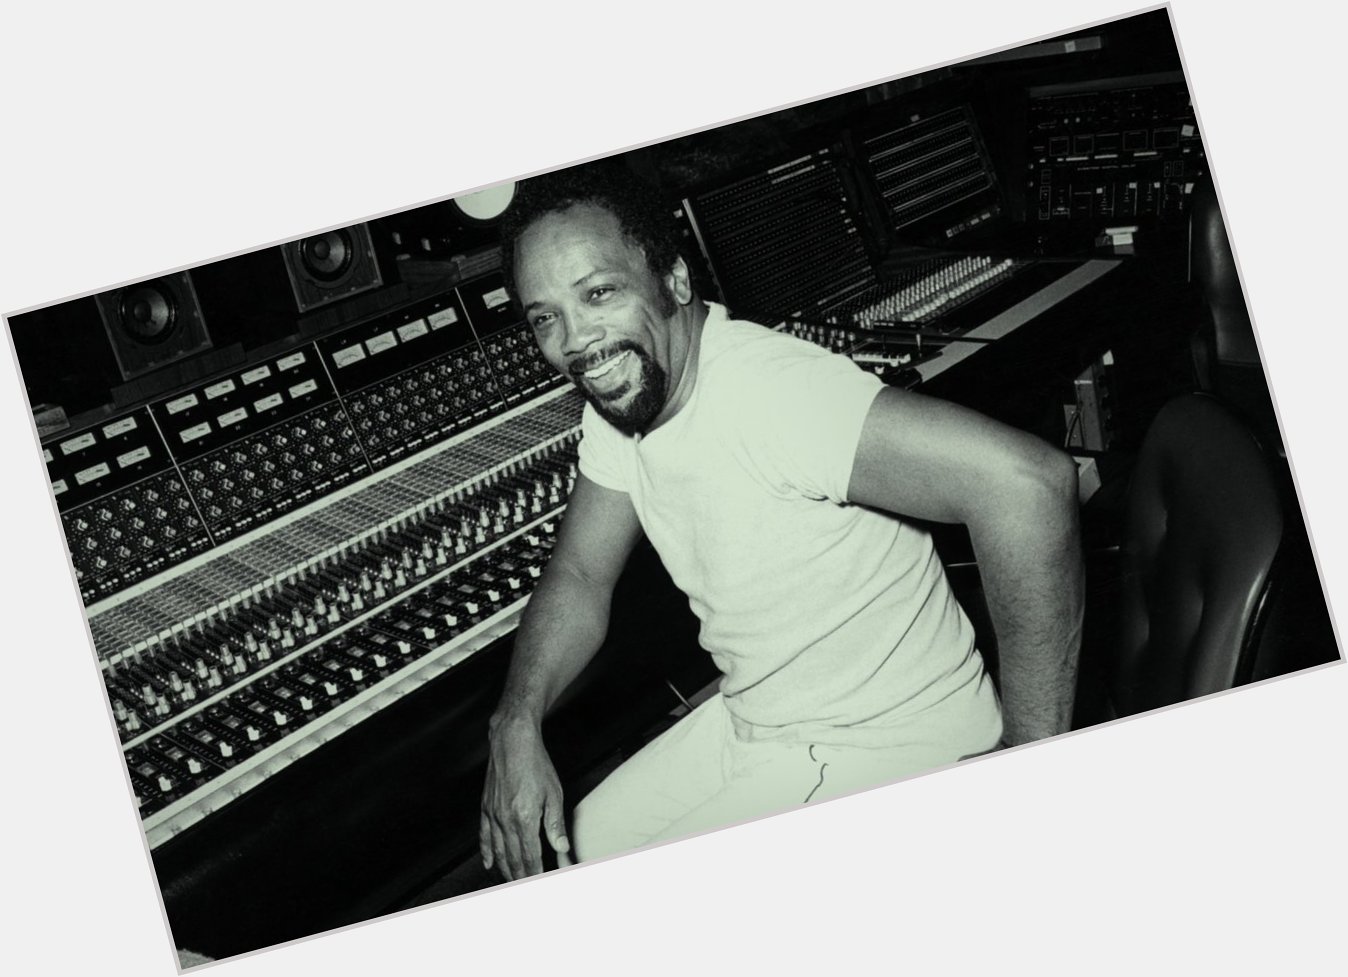 HAPPY 89th BIRTHDAY to Quincy Jones. One of the greatest Music Producers of all time. 